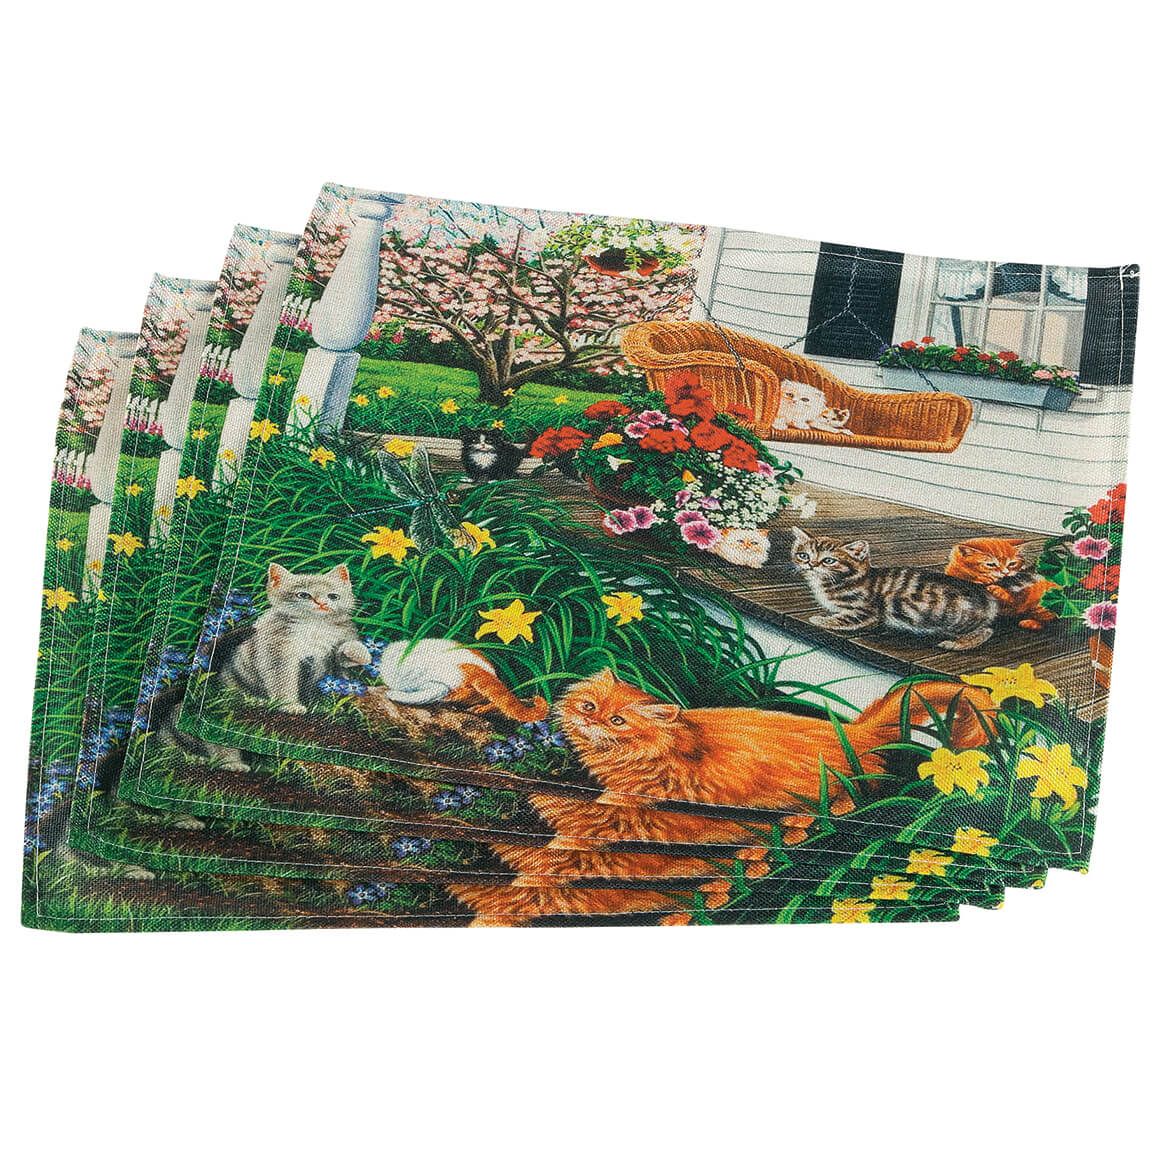 Cats In Yard Placemats, Set of 4 + '-' + 376770